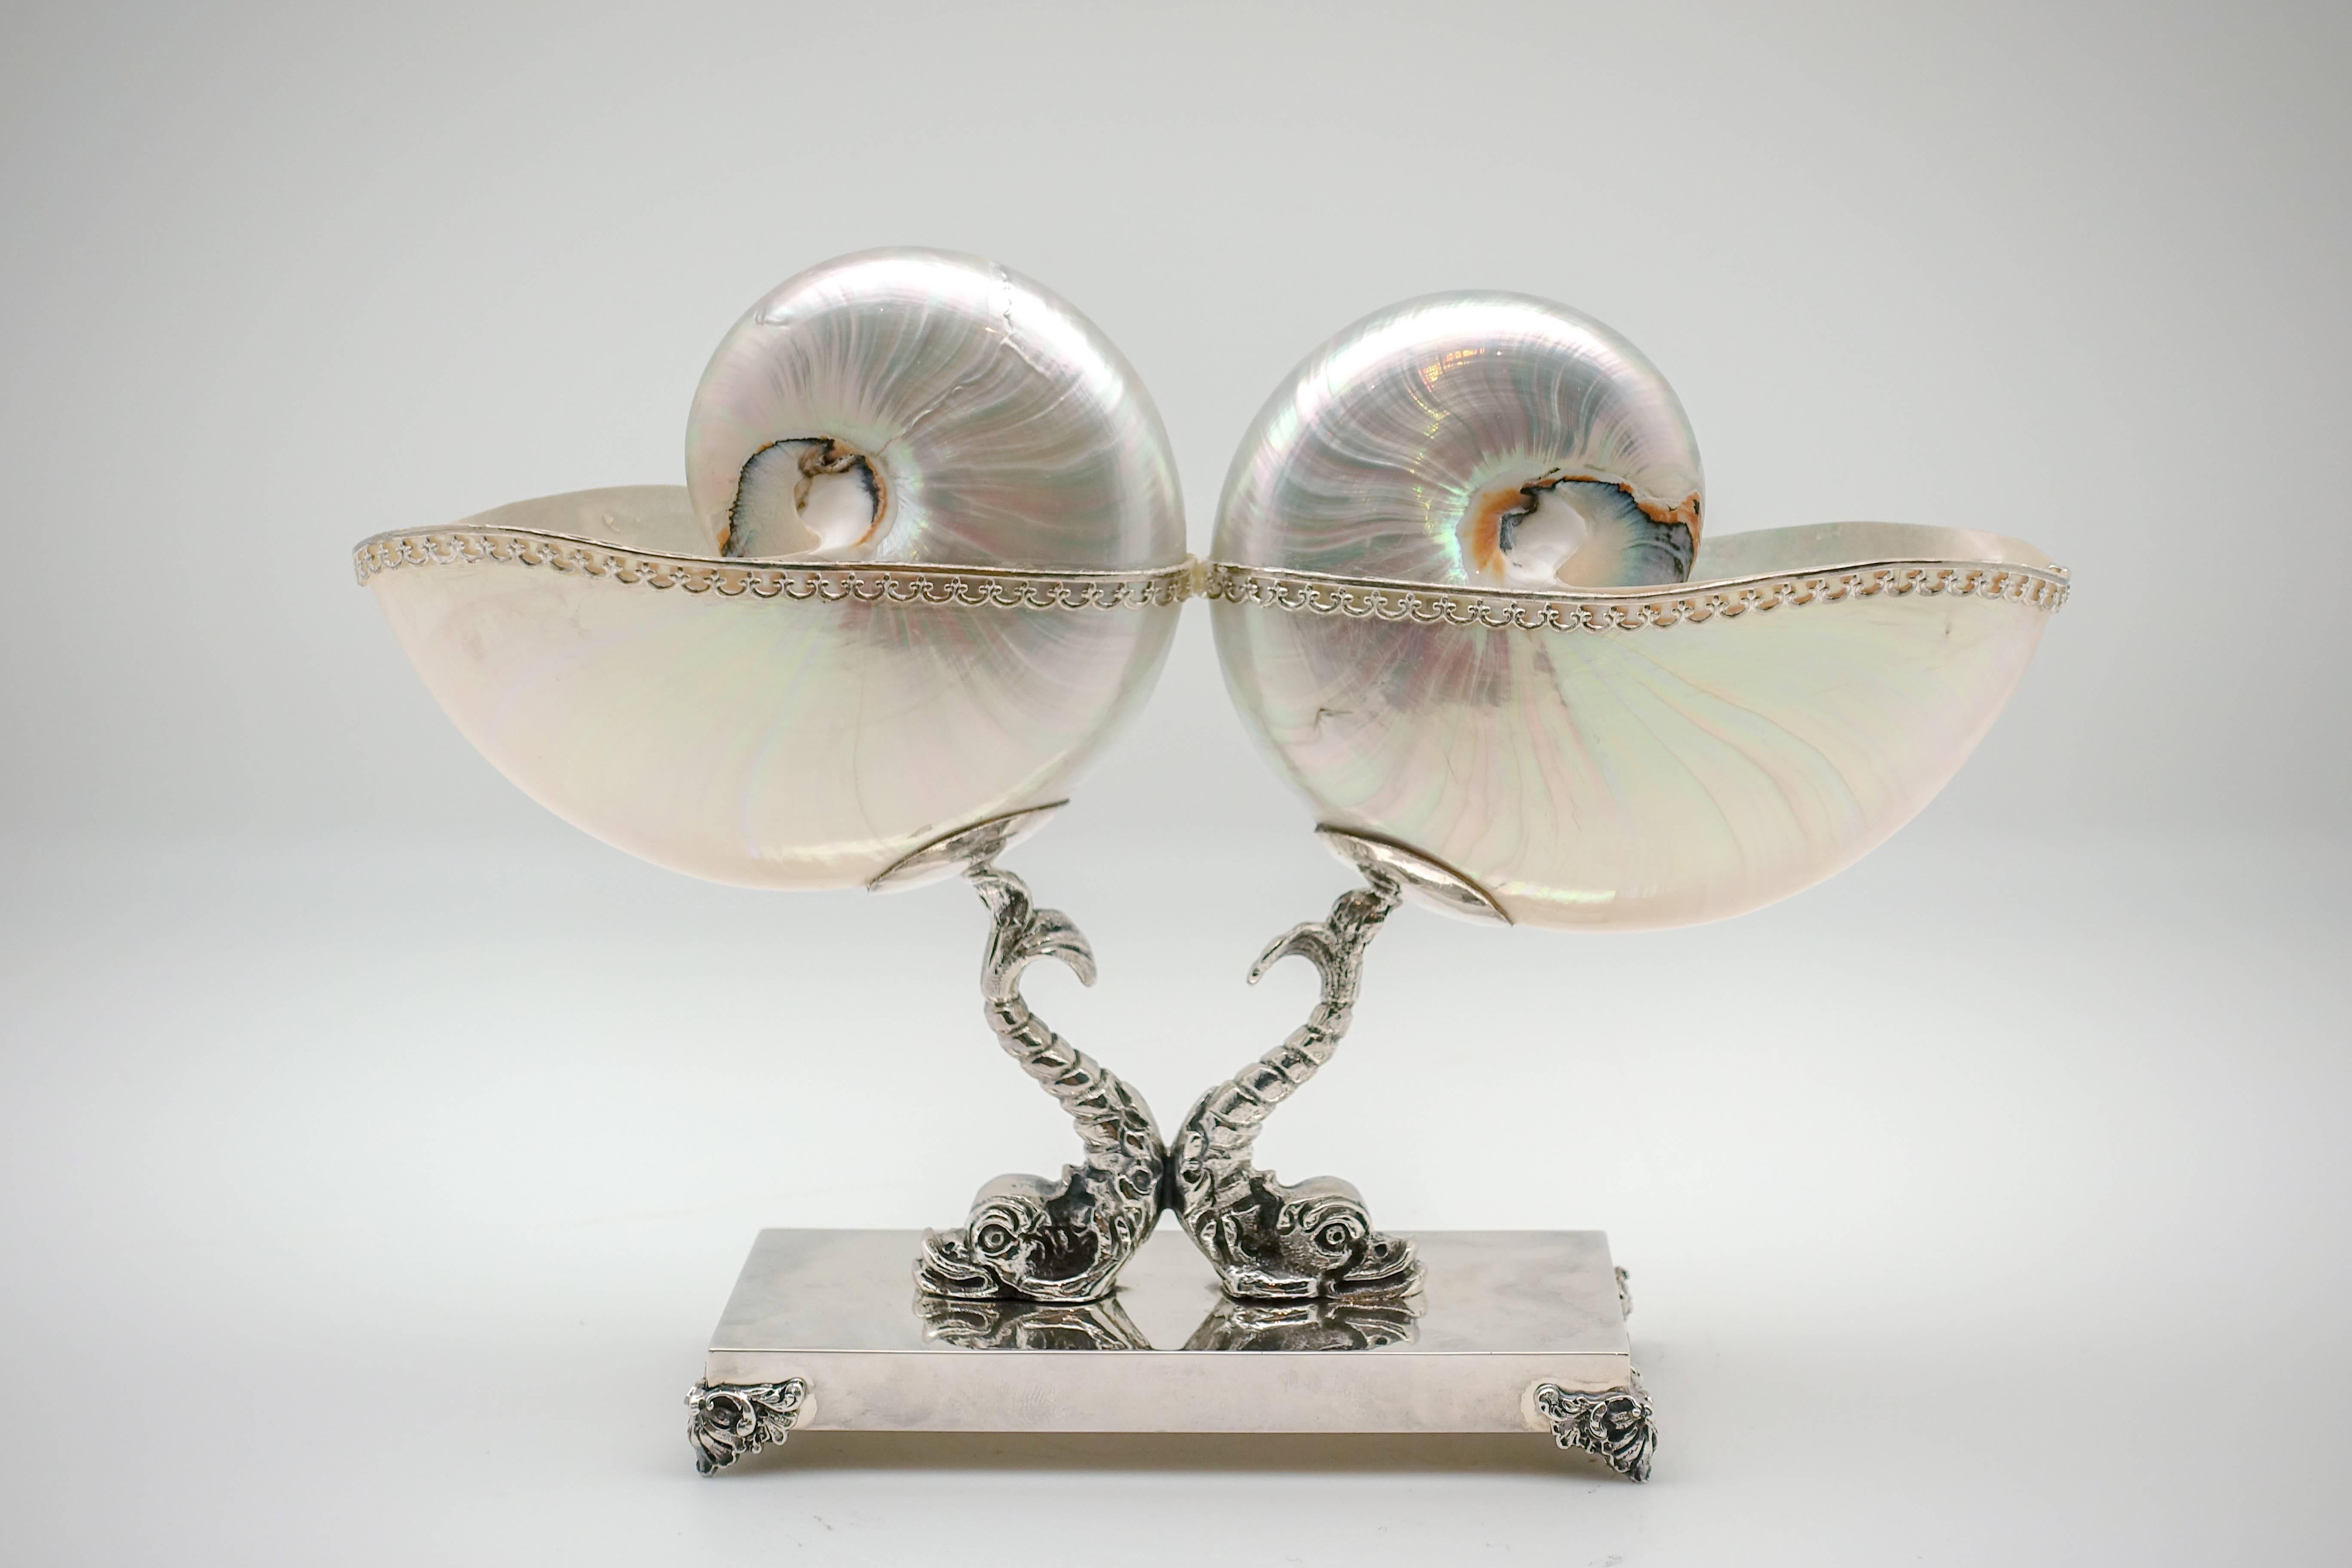 What could be better than a mother of pearl Nautilus? Two mother of pearl nautilus shells. Edged in a pierced, Italian sterling silver design, they are mounted on a triton base for a pleasing display of natural beauty.
Handmade in Rome, Italy.